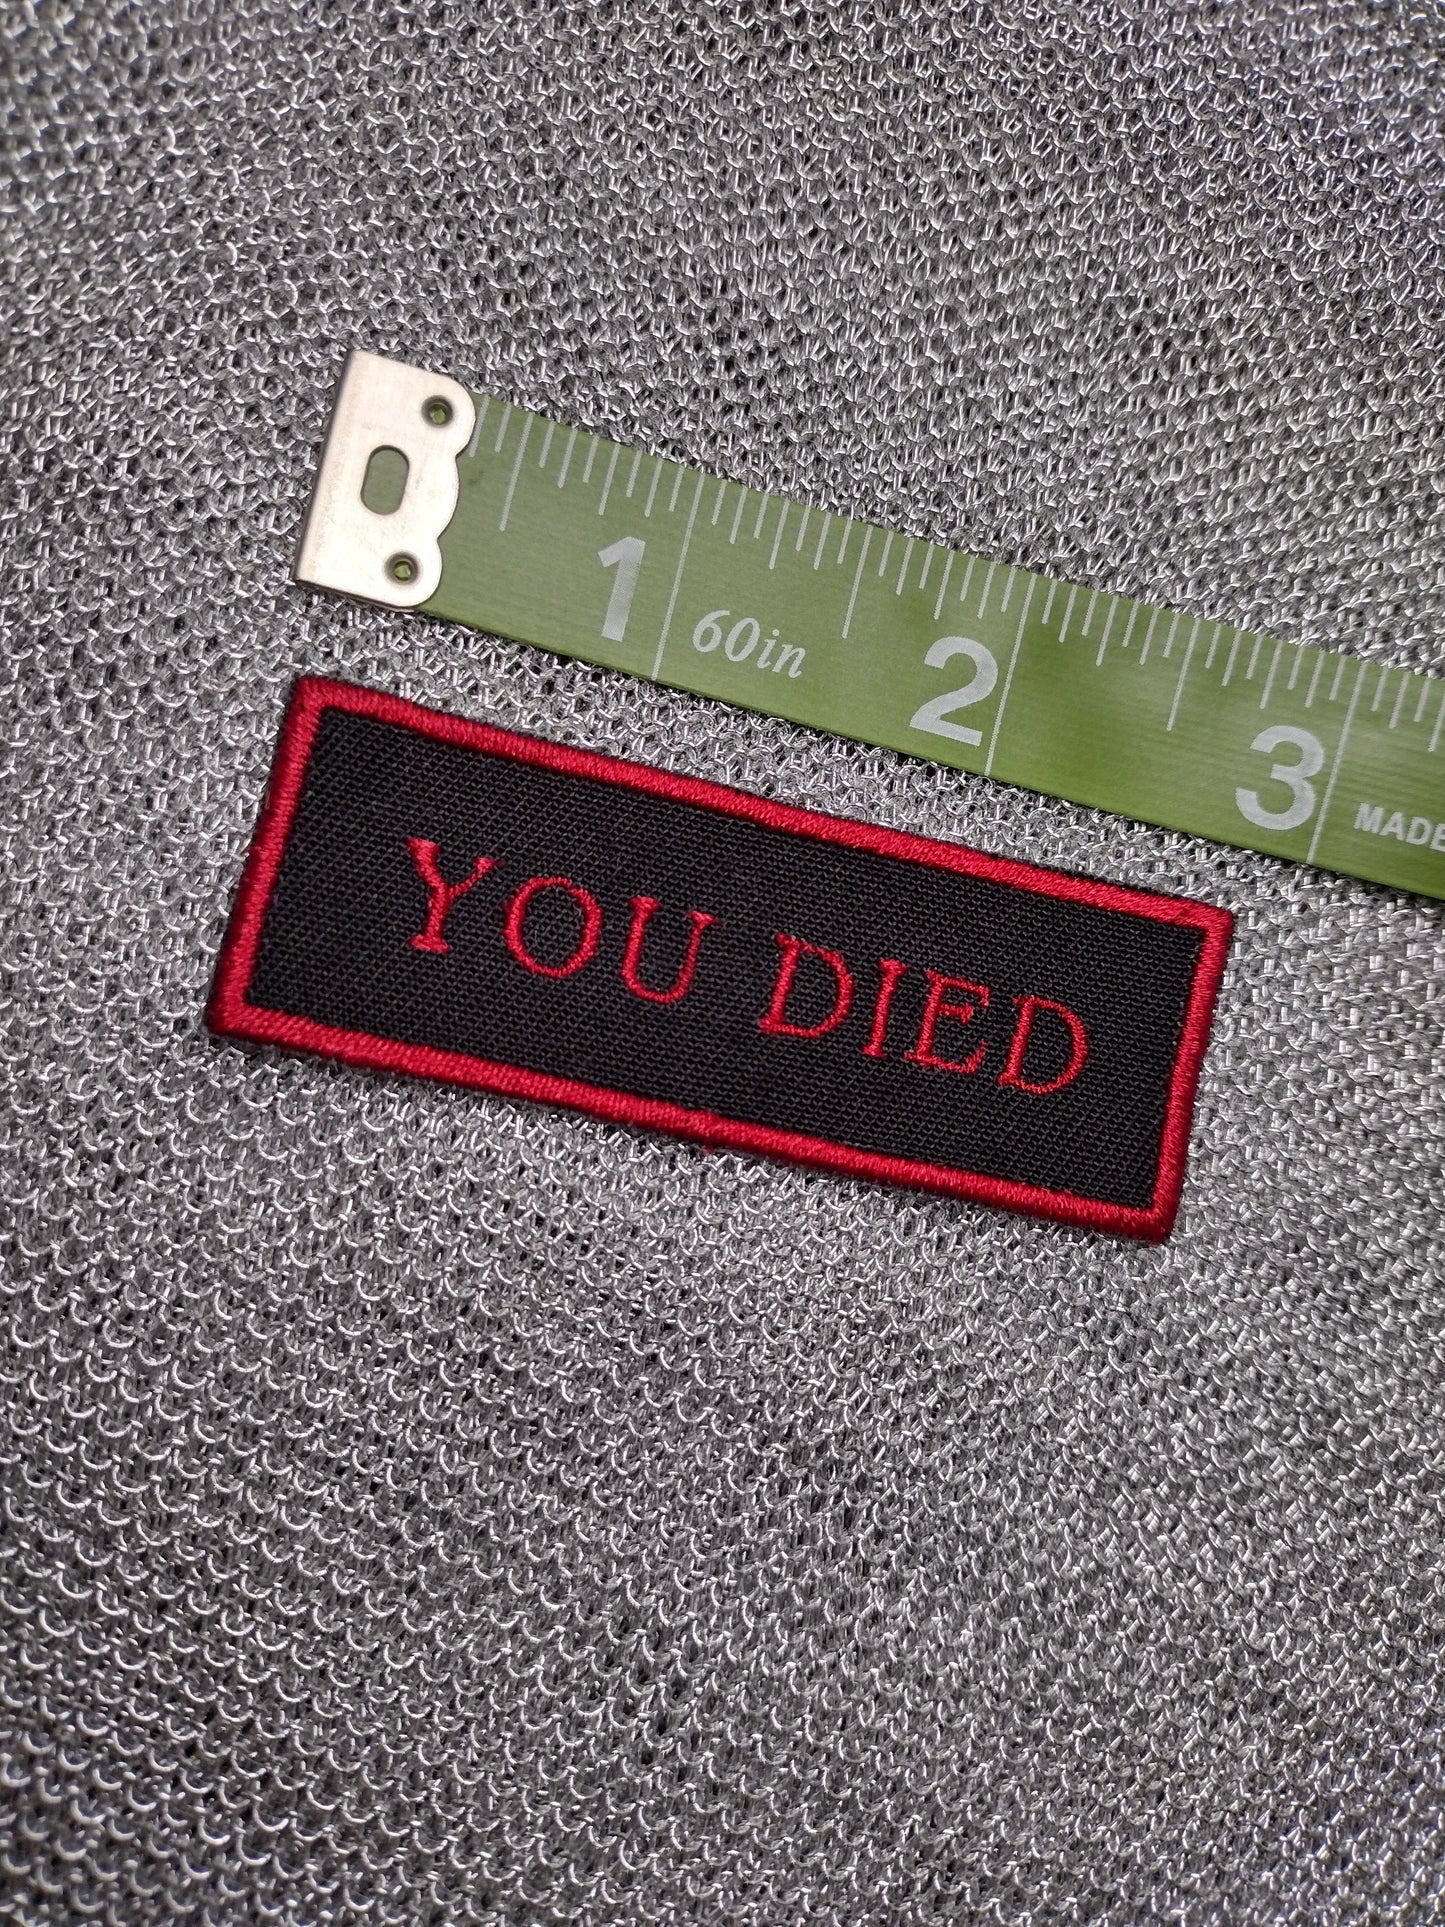 'You died' patch *sew on*